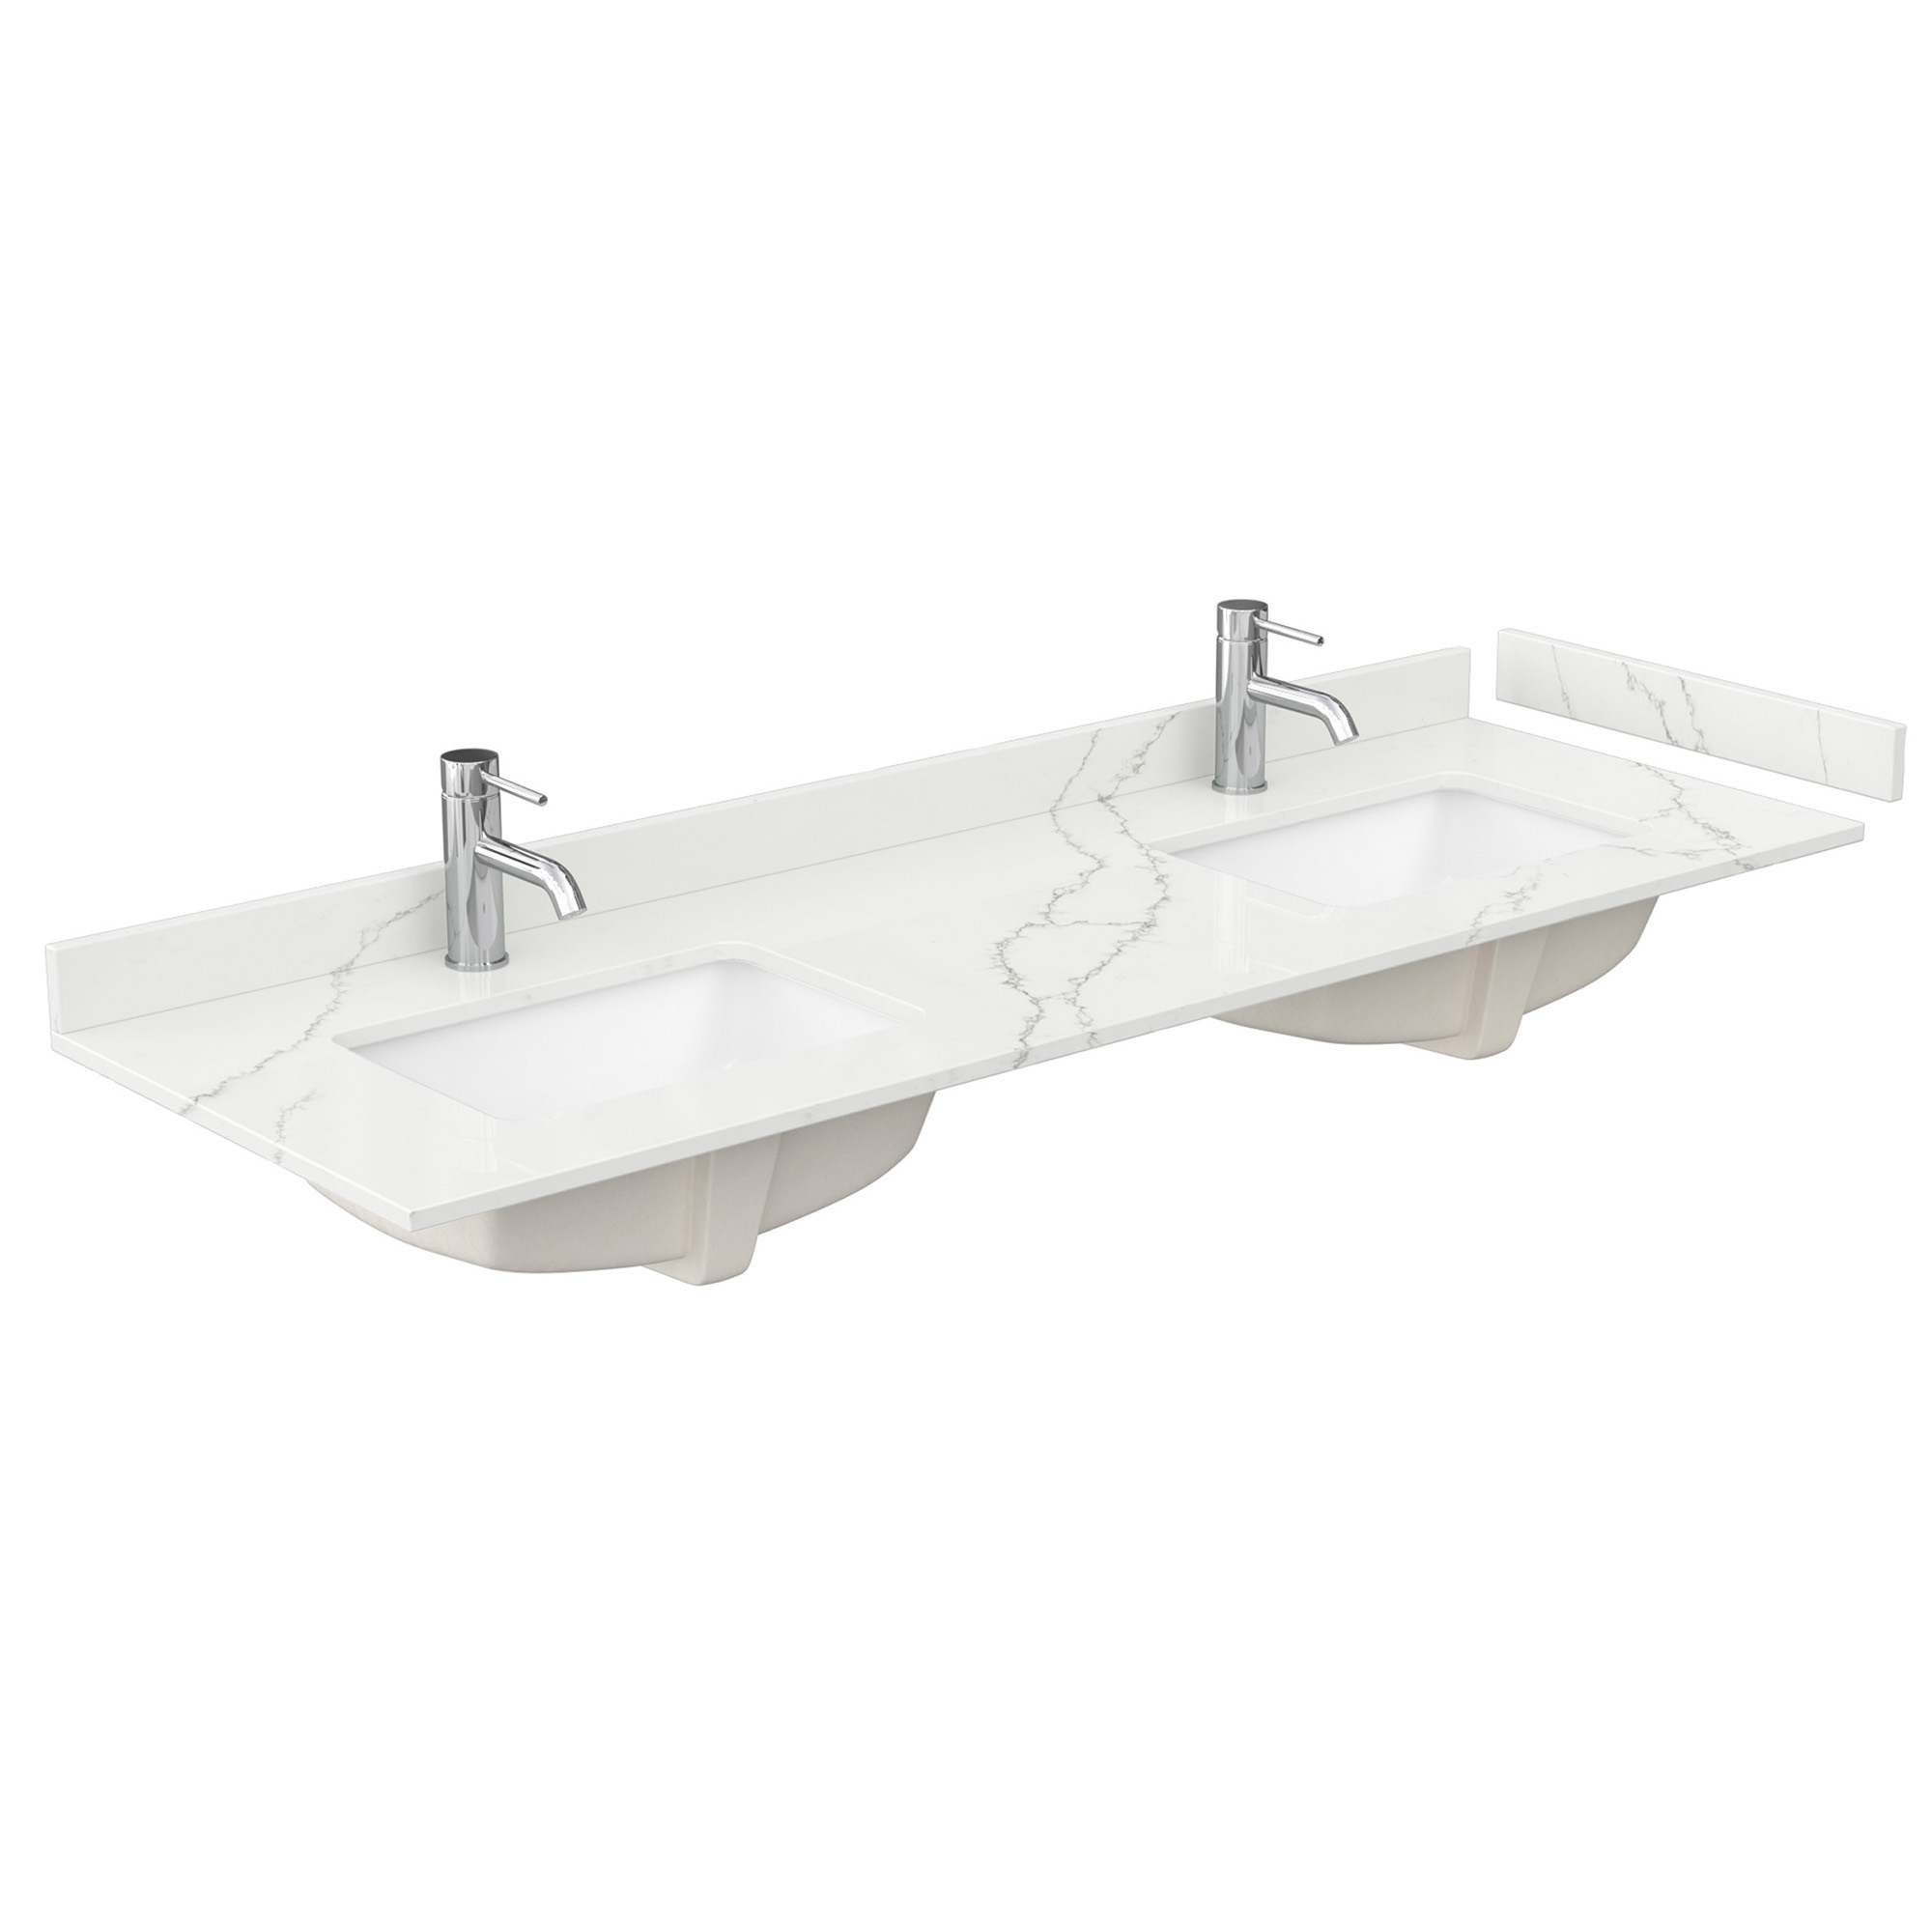 66" Double Countertop - Giotto Quartz (8066) with Undermount Square Sinks (1-Hole) - Includes Backsplash and Sidesplash WCFQC166DTOPUNSGT